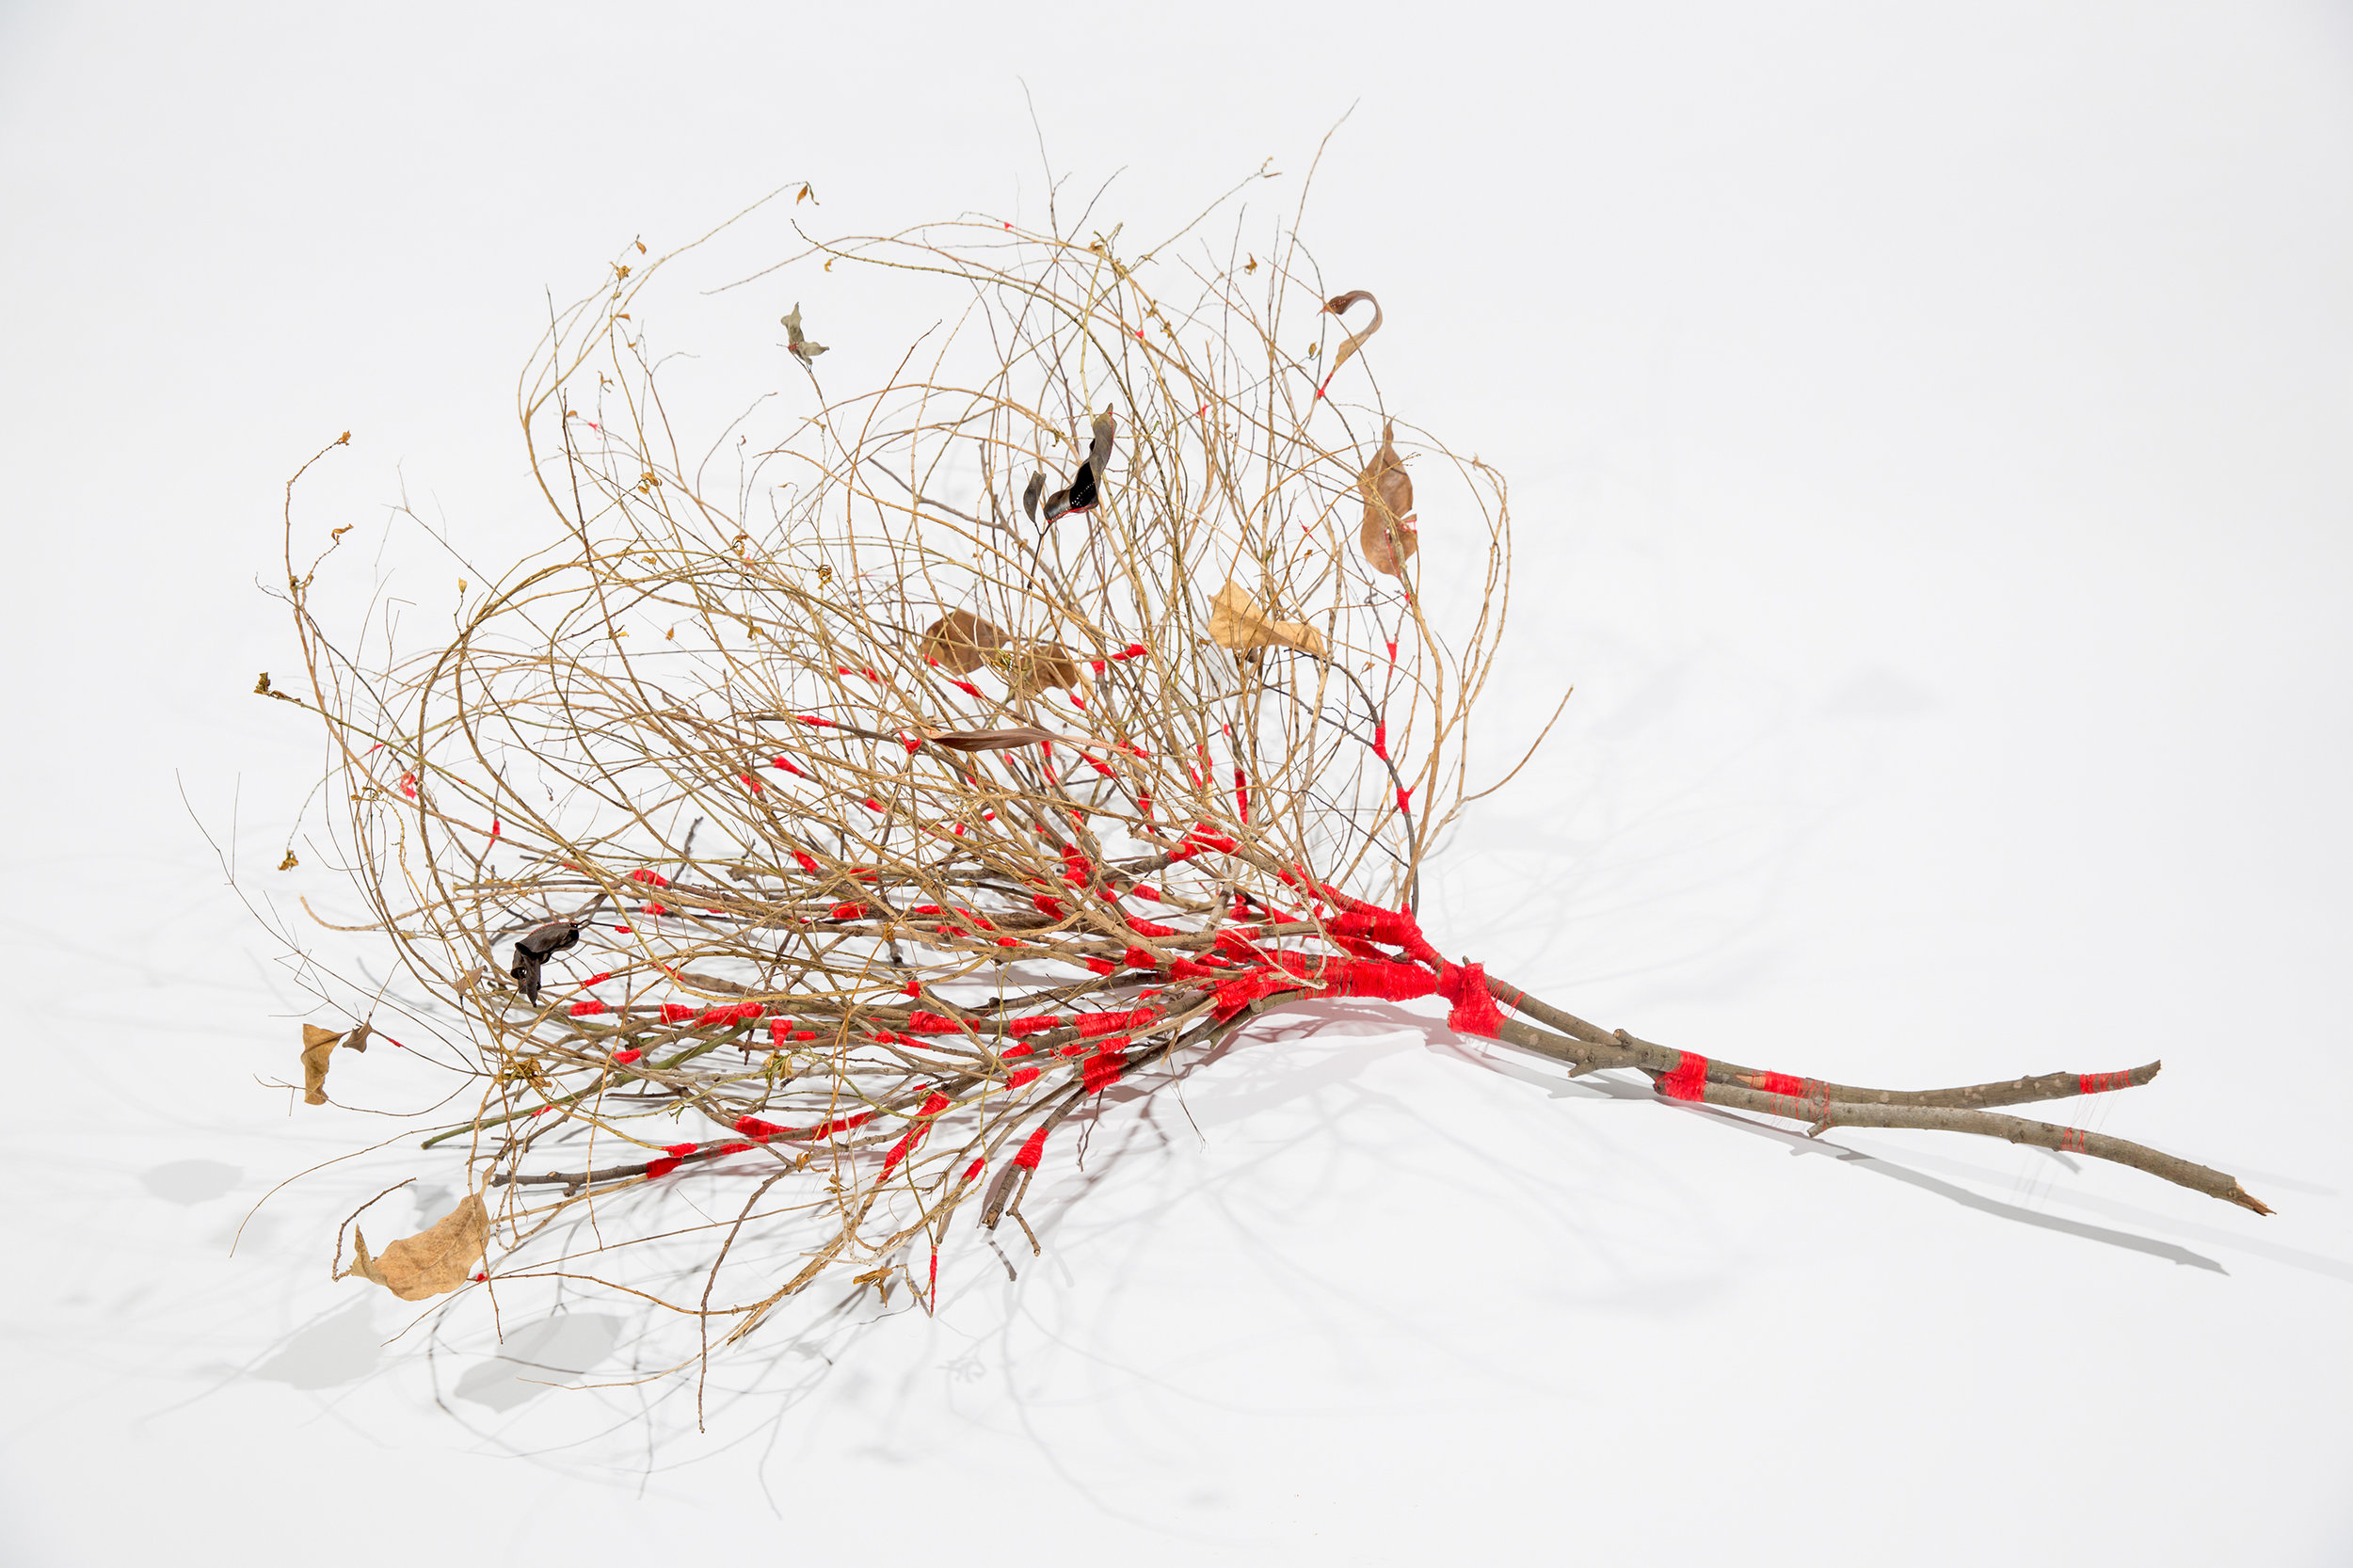  Untitled  Twigs, leaves, hair, red thread, red tape  Dimensions variable  2016-2017 